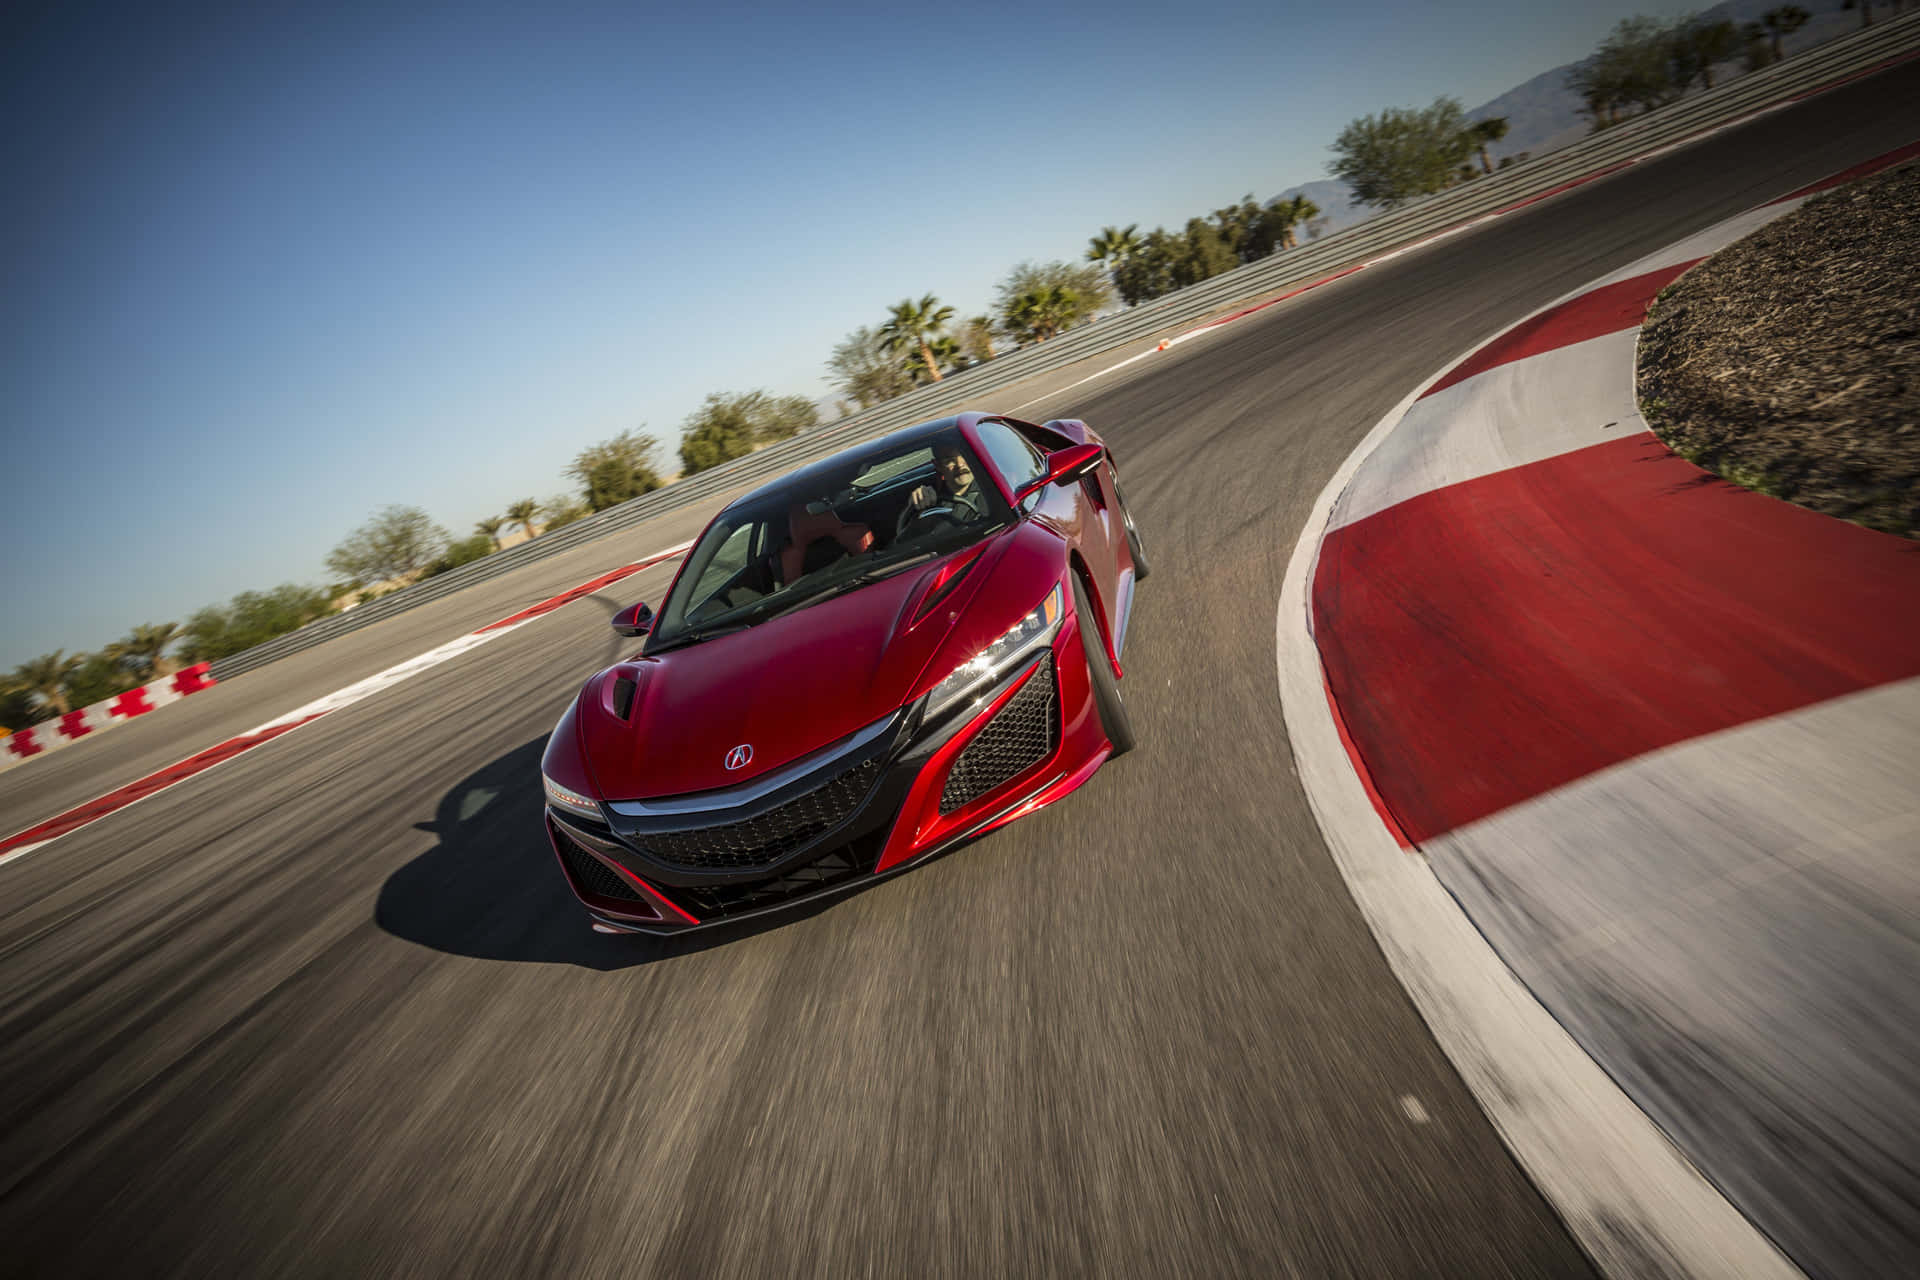 The Red Honda Nsx Is Driving On A Race Track